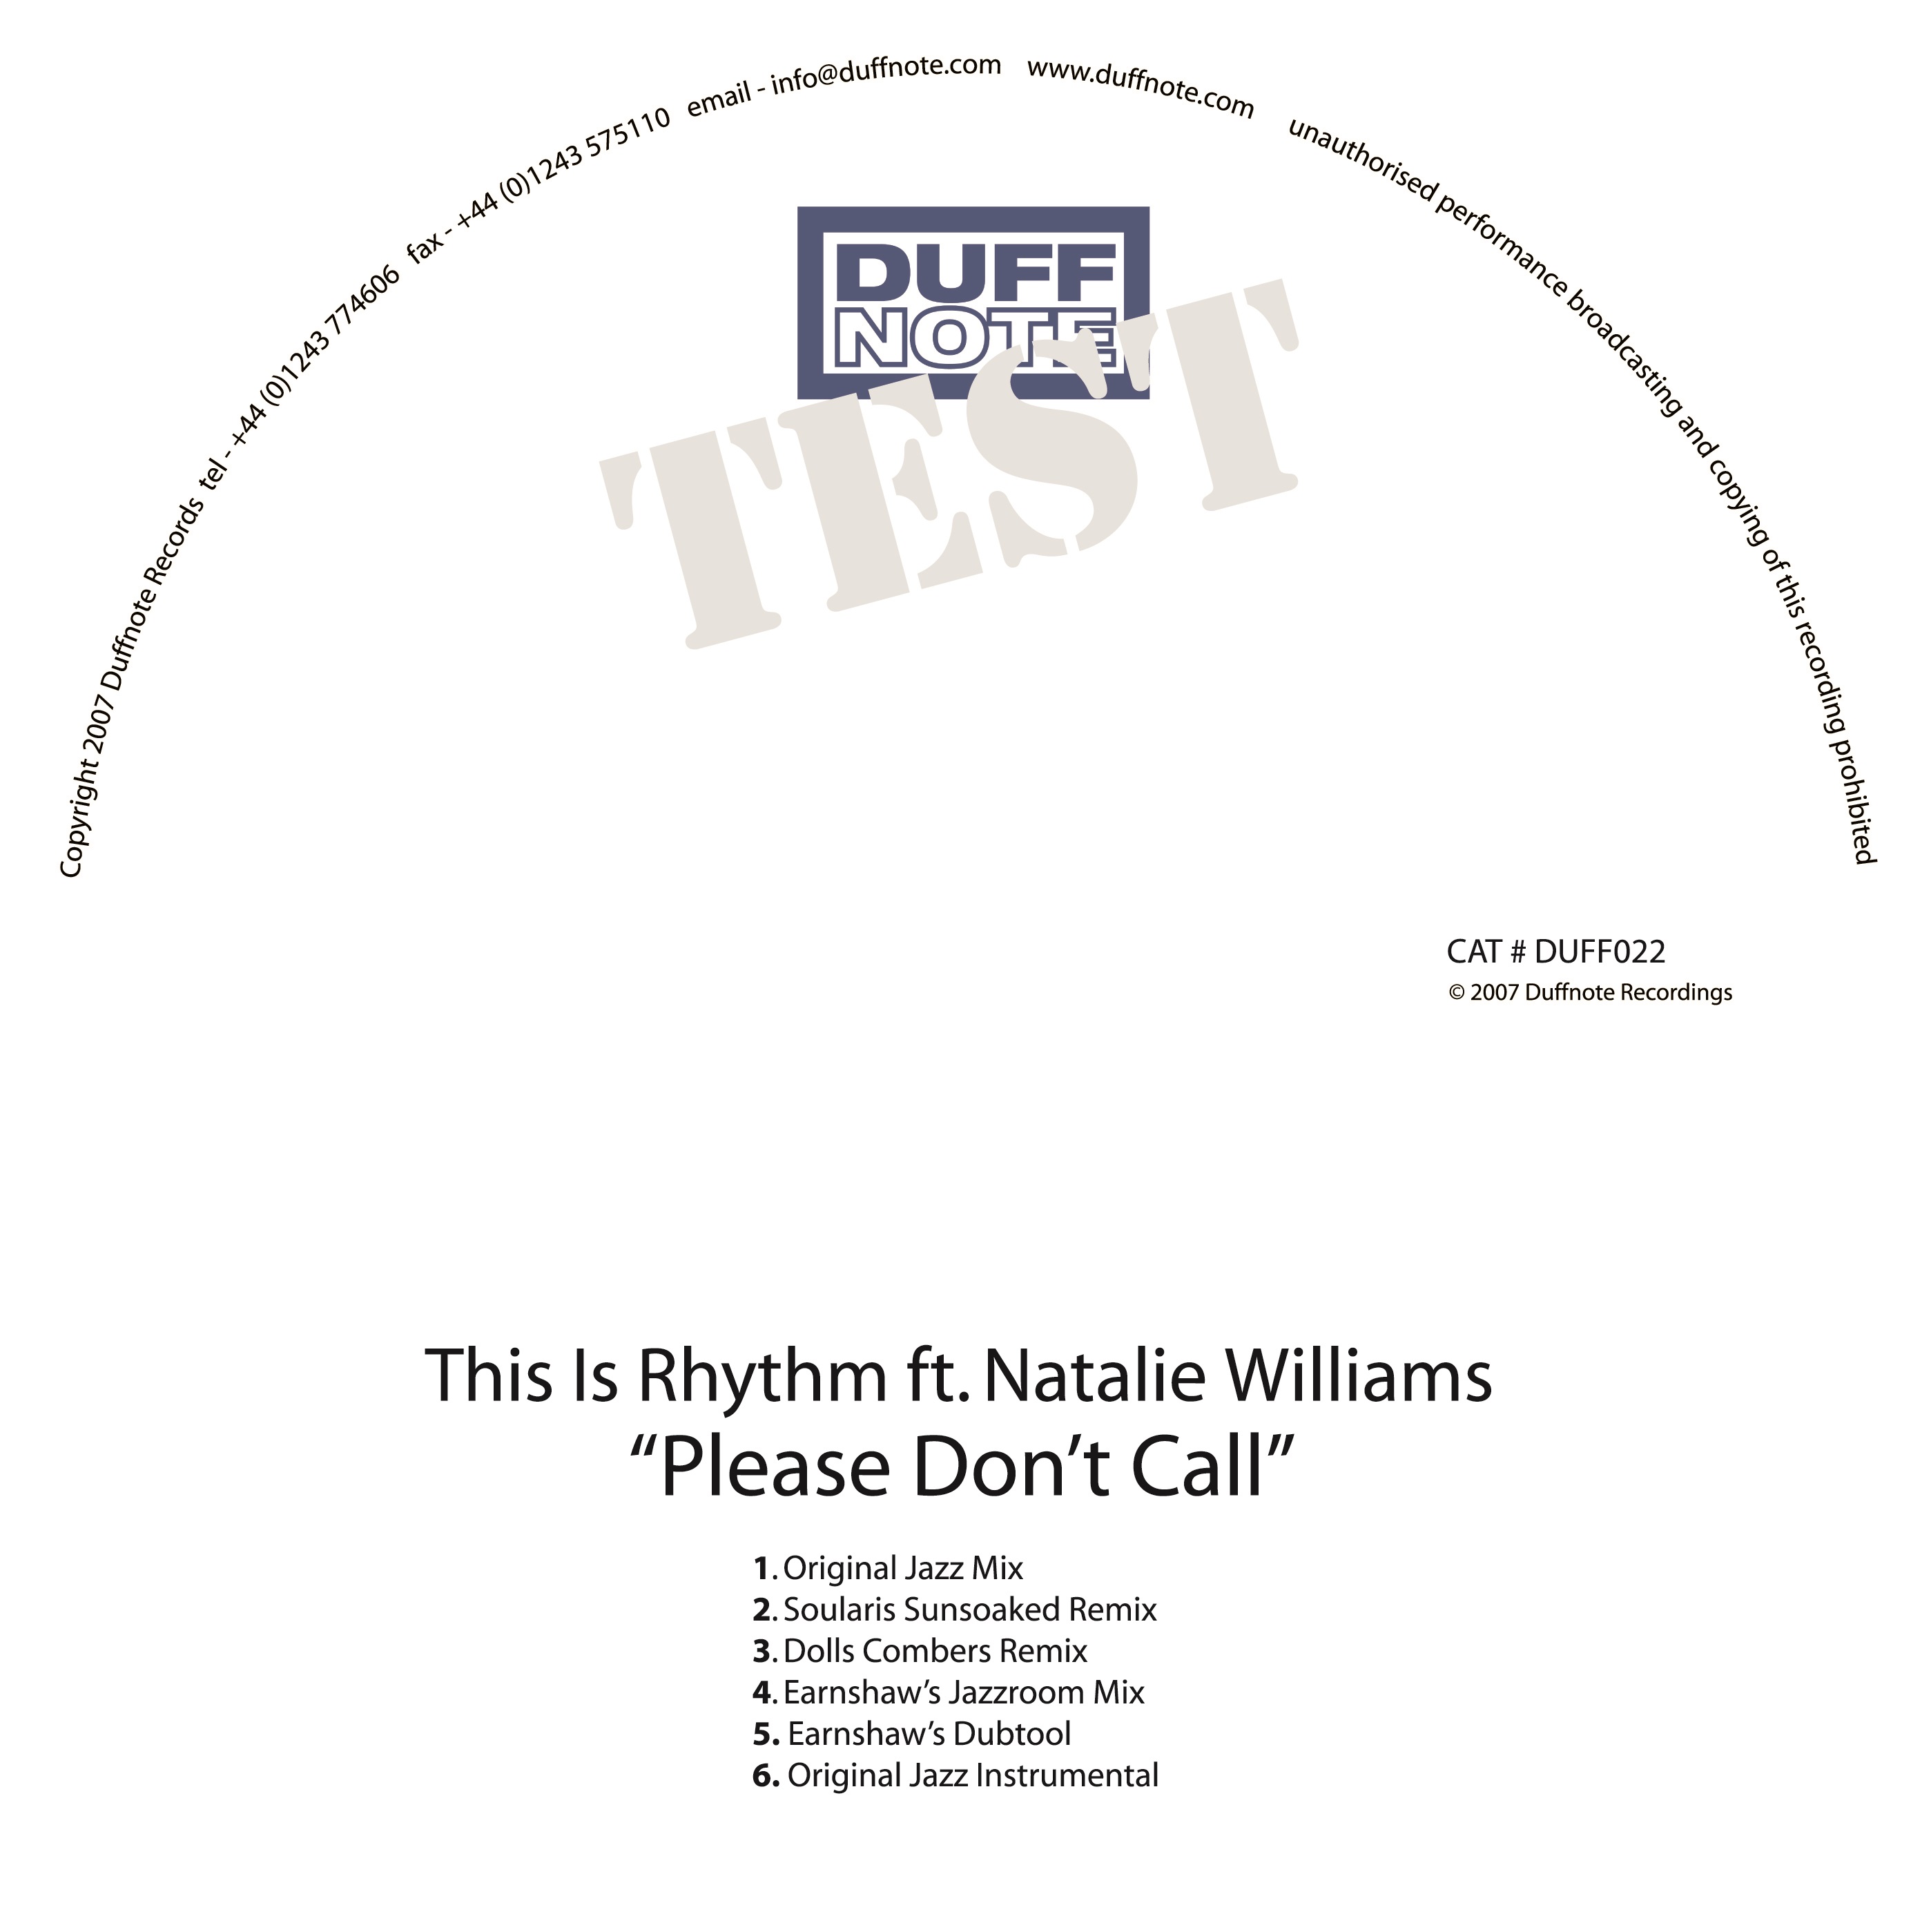 This Is Rhythm feat. Natalie Williams - Please Don't Call